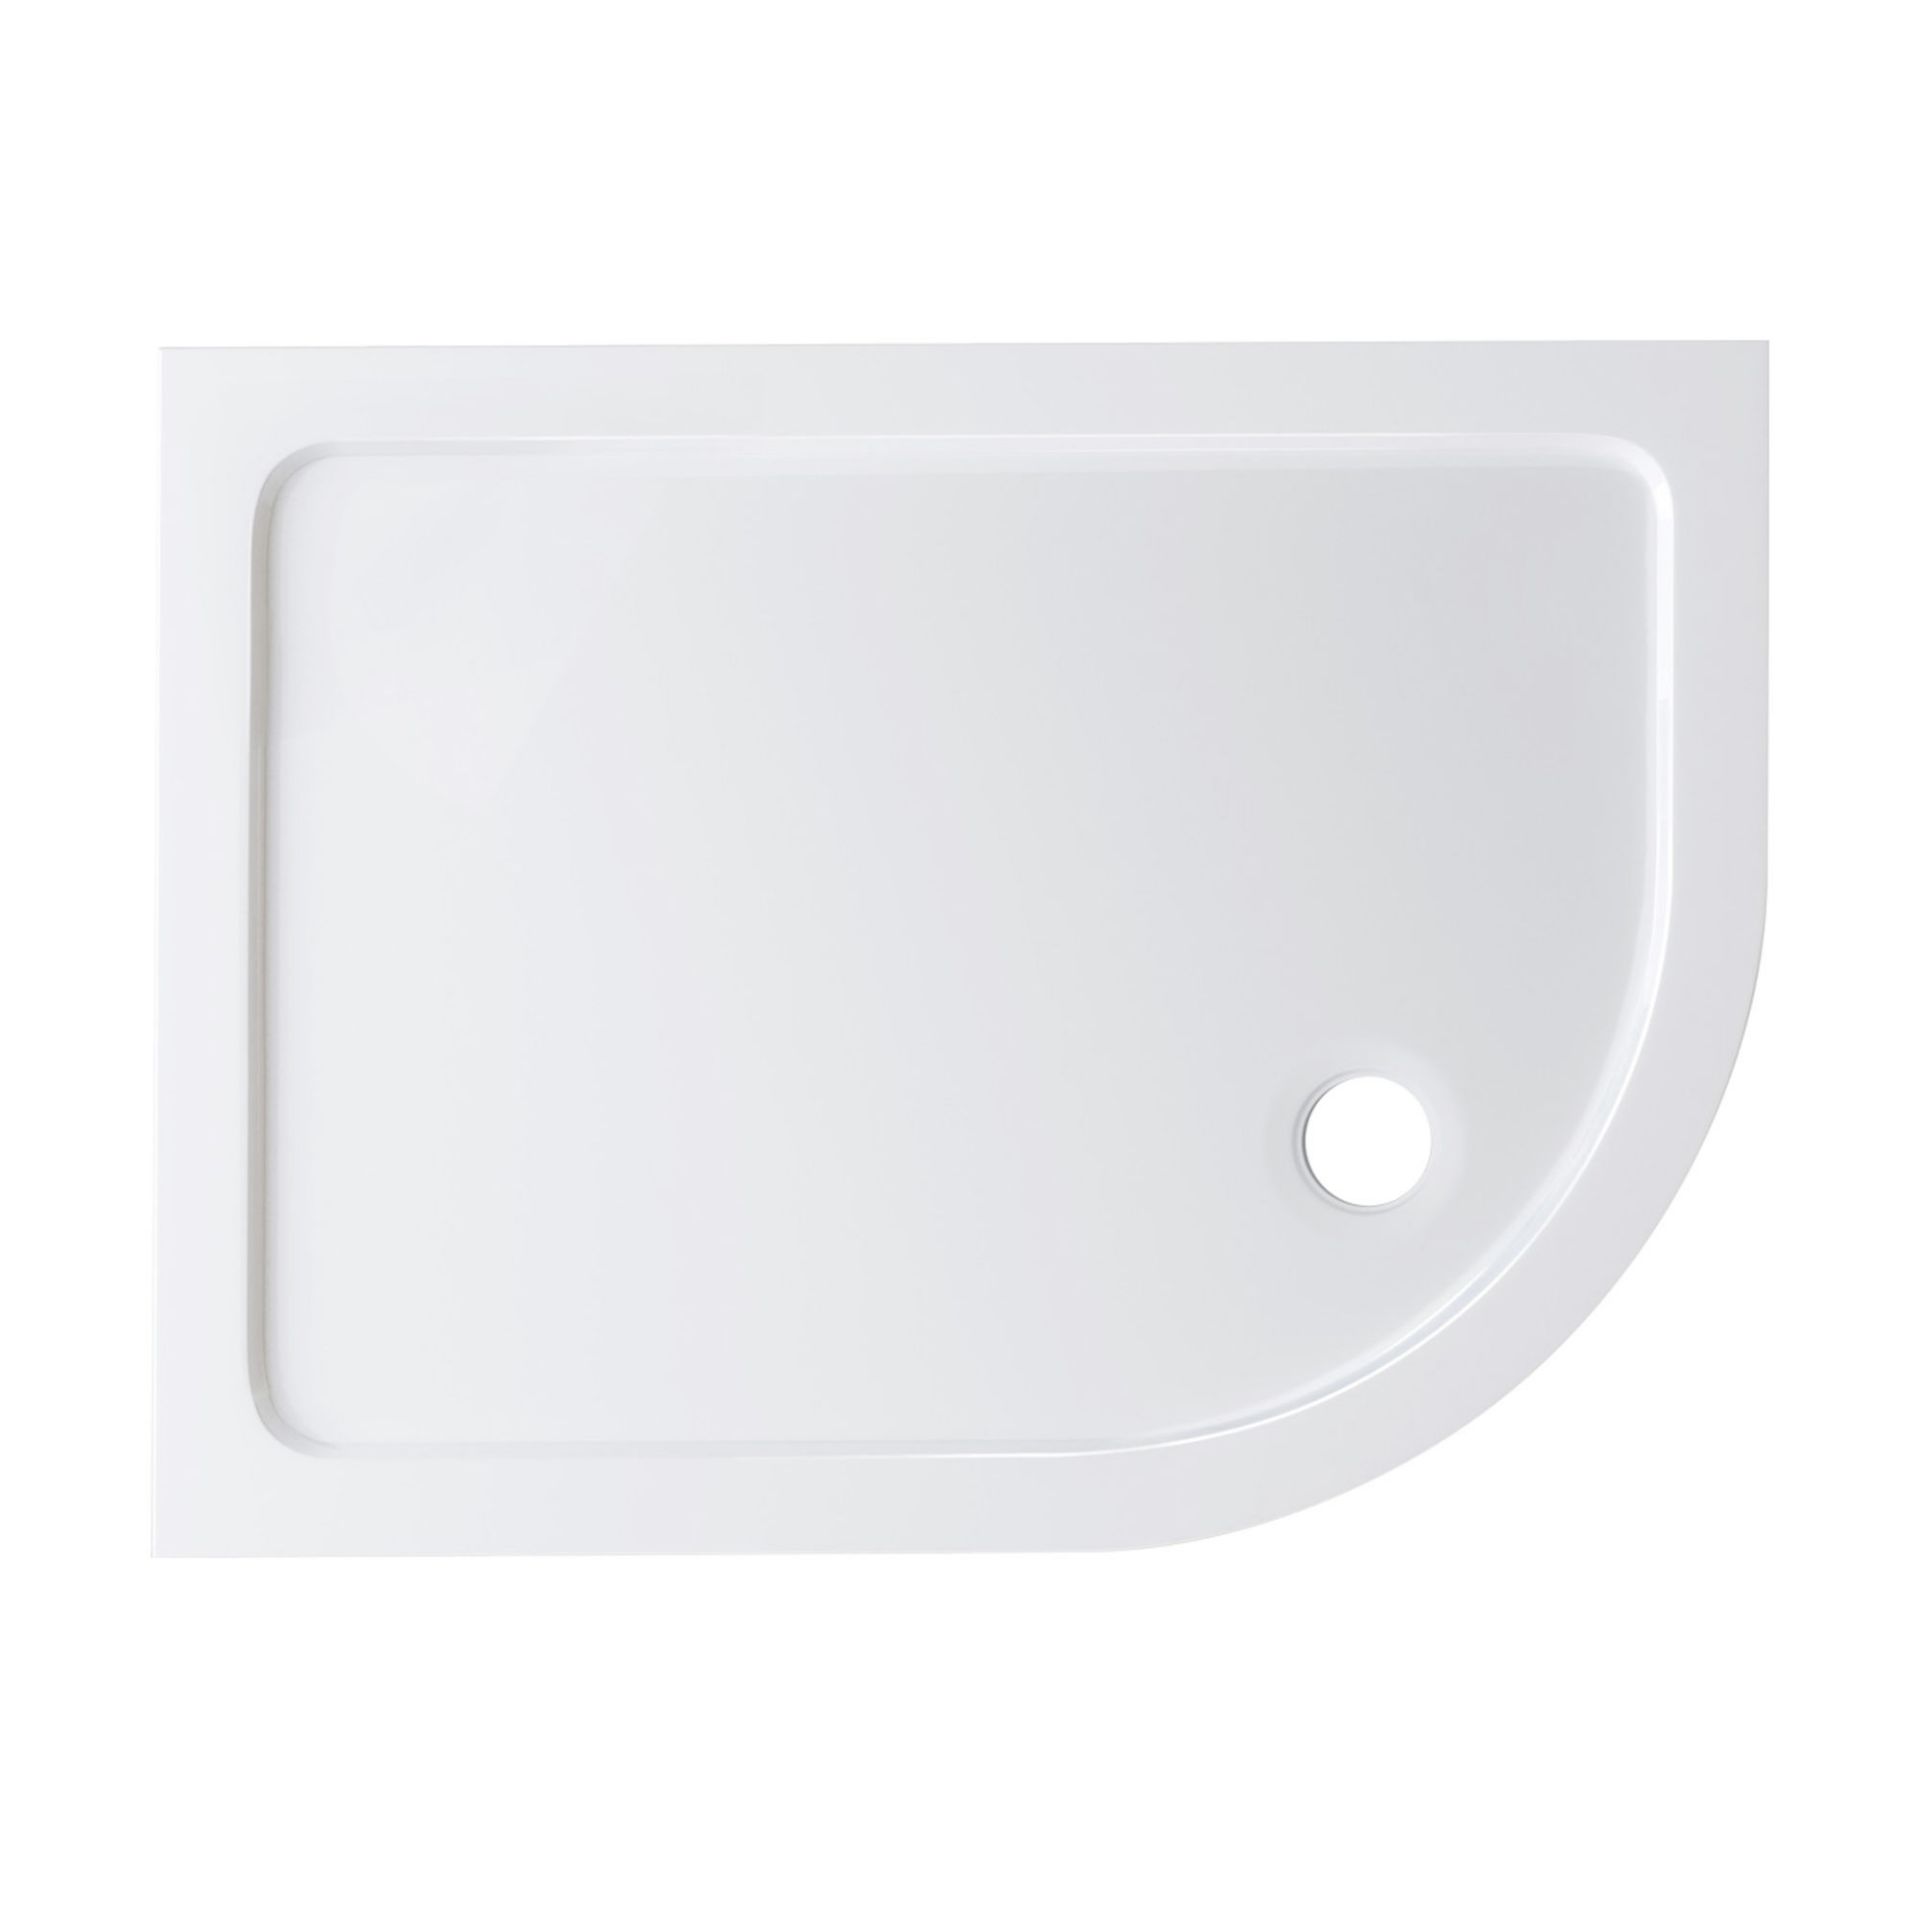 (AD91) 1200x900mm Offset Quadrant Ultra Slim Stone Shower Tray - Right. Low profile ultraDesign - Image 2 of 4